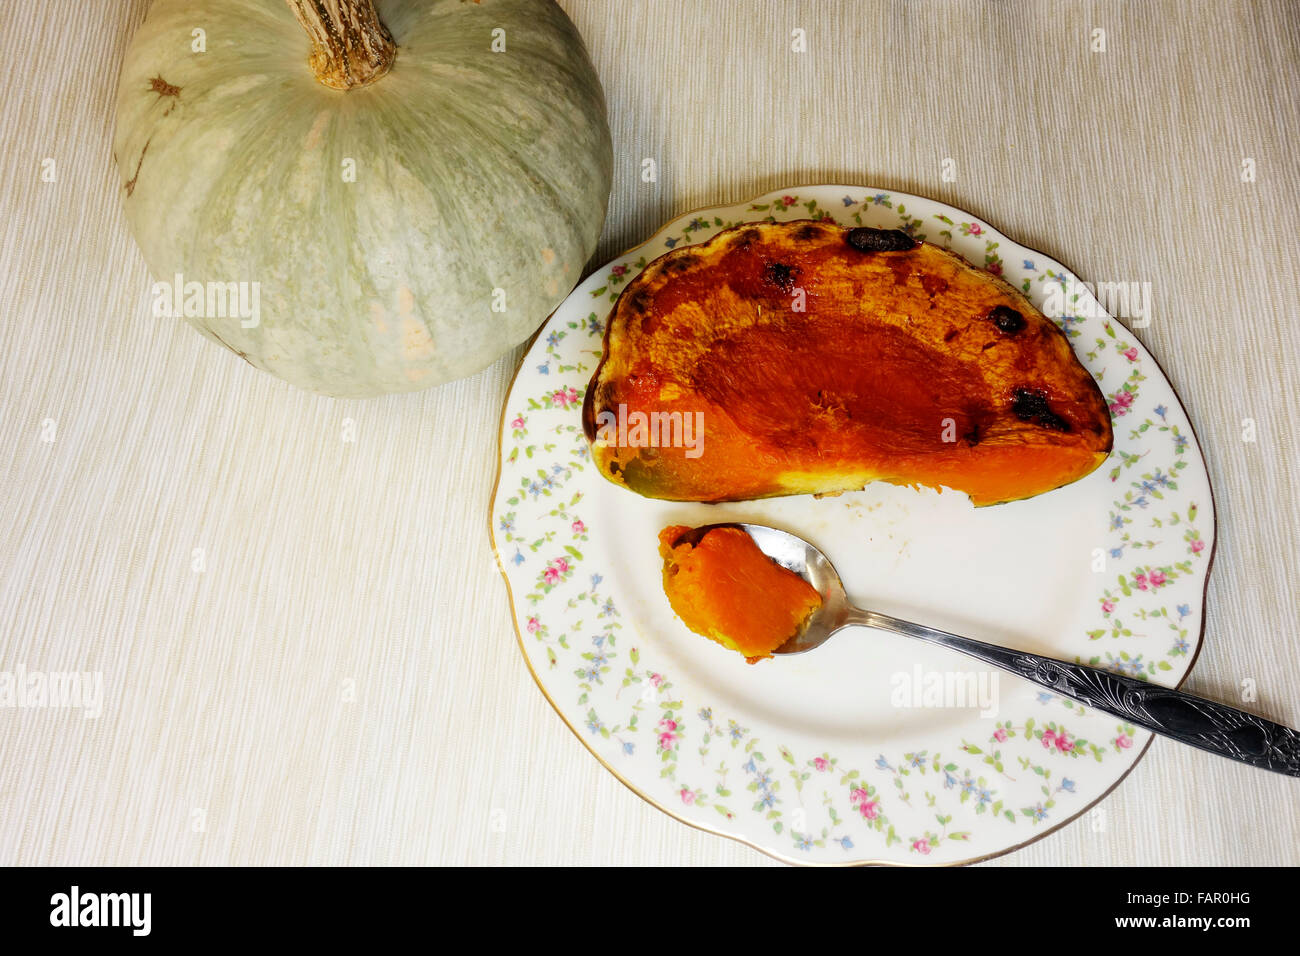 Oven baked Sweet  'Kroshka' a winter squash. A slice served on a white saucer Stock Photo